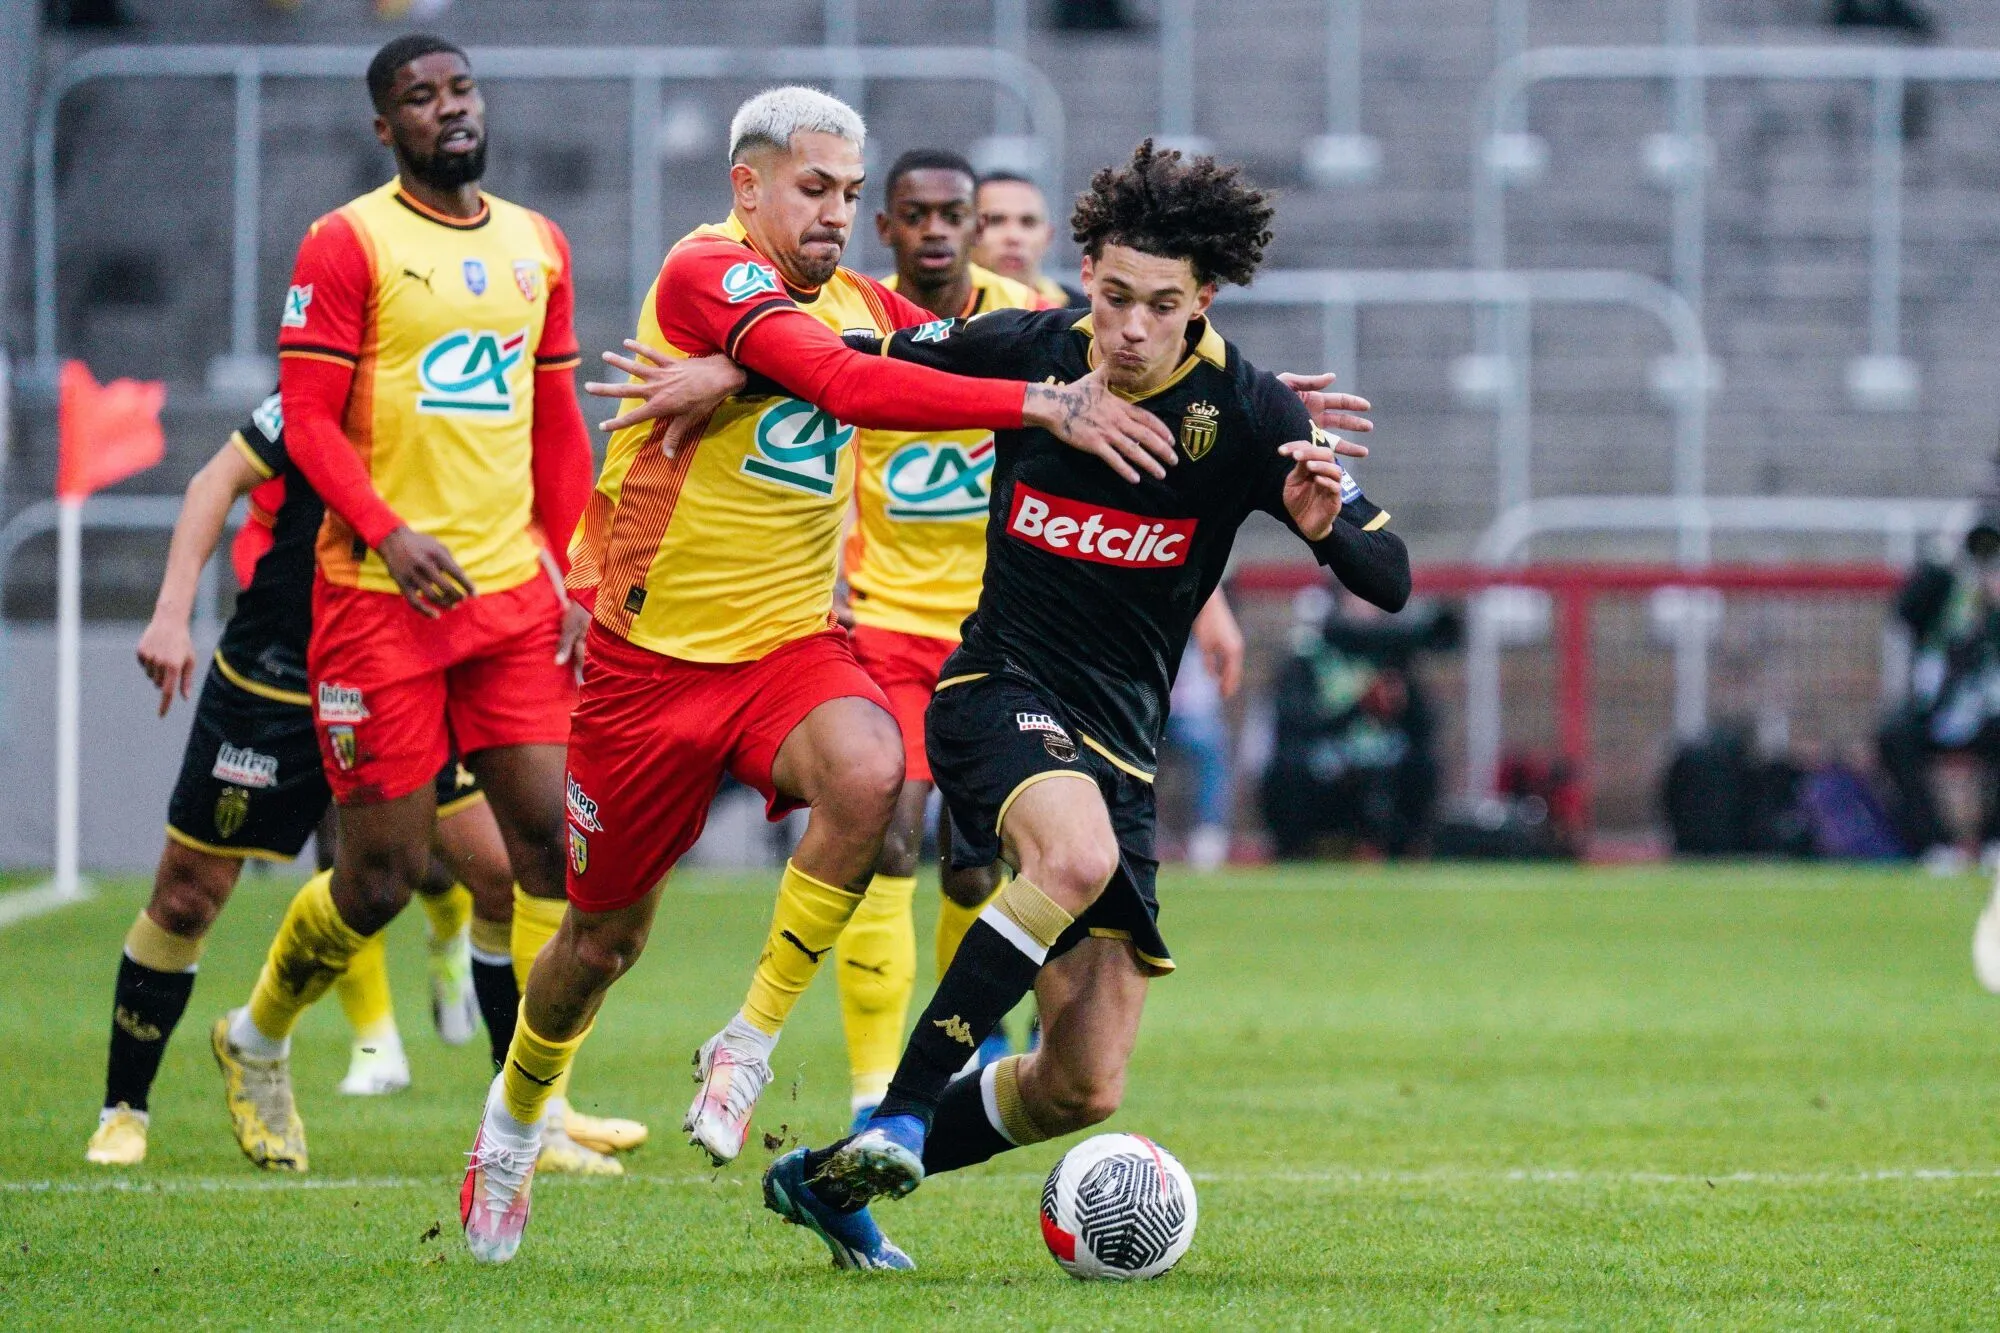 Maghnes AKLIOUCHE of Monaco during the French Cup match between Racing Club de Lens and Association Sportive de Monaco Football Club at Stade Bollaert-Delelis on January 7, 2024 in Lens, France. (Photo by Dave Winter/Icon Sport)